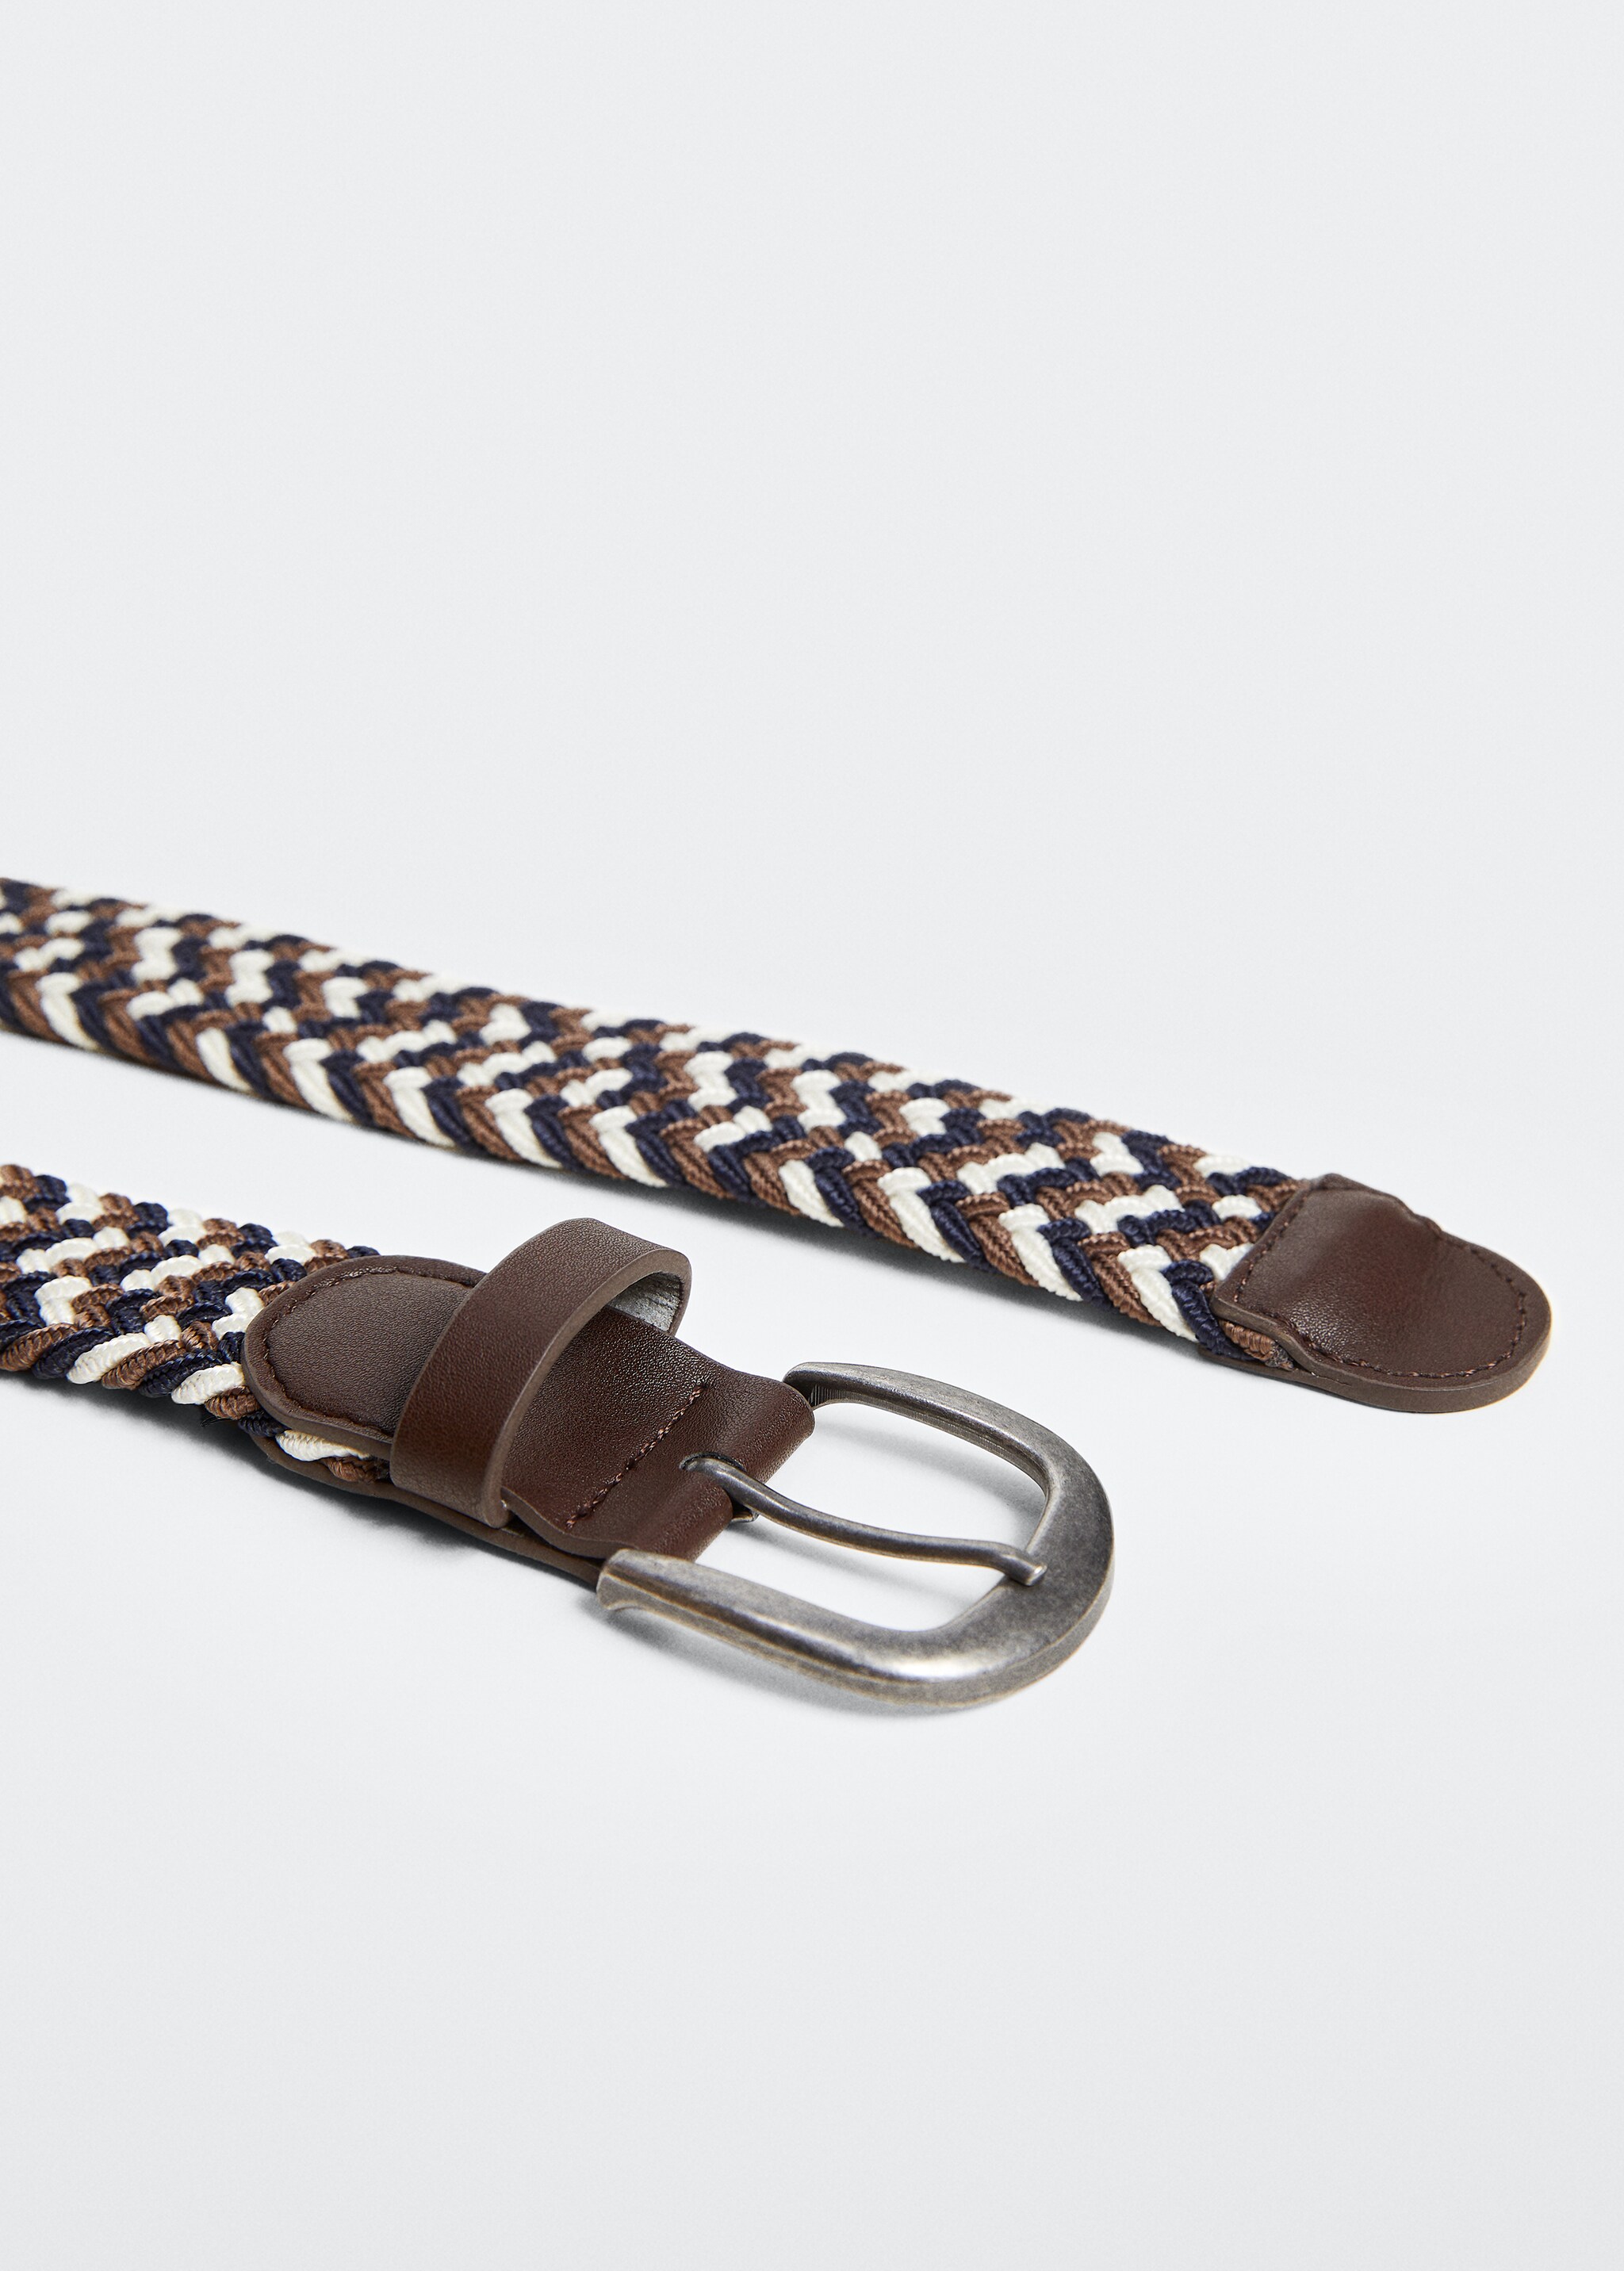 Braided belt - Details of the article 1